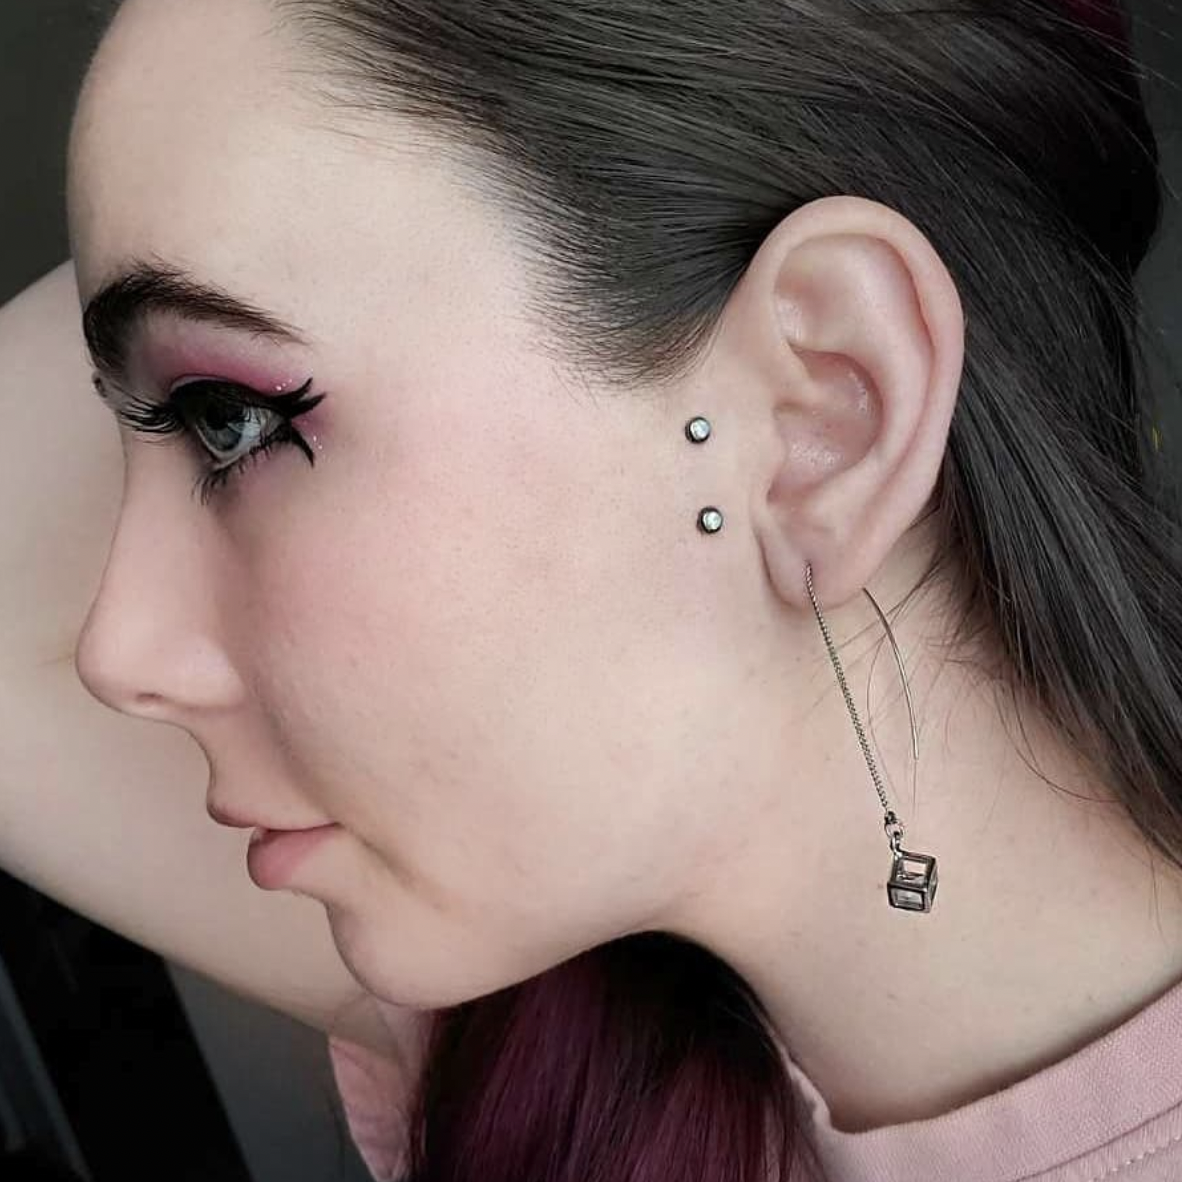 woman with surface piercing by her ear